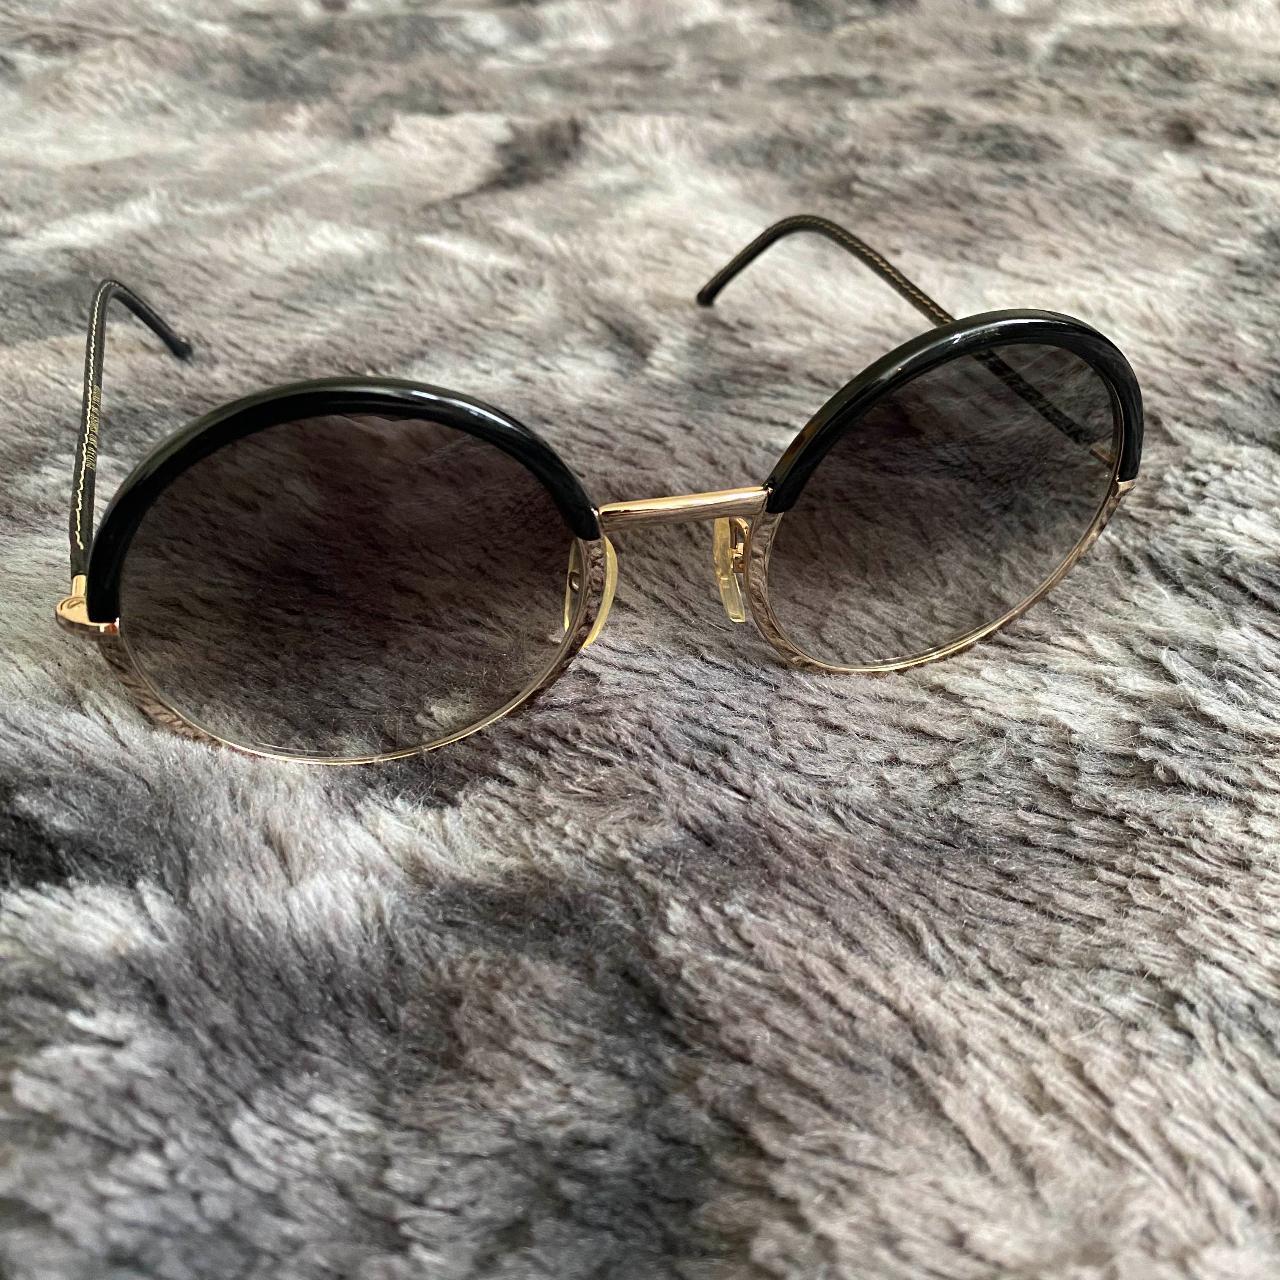 Product Image 1 - Cutler & Gross sunglasses

Gold /